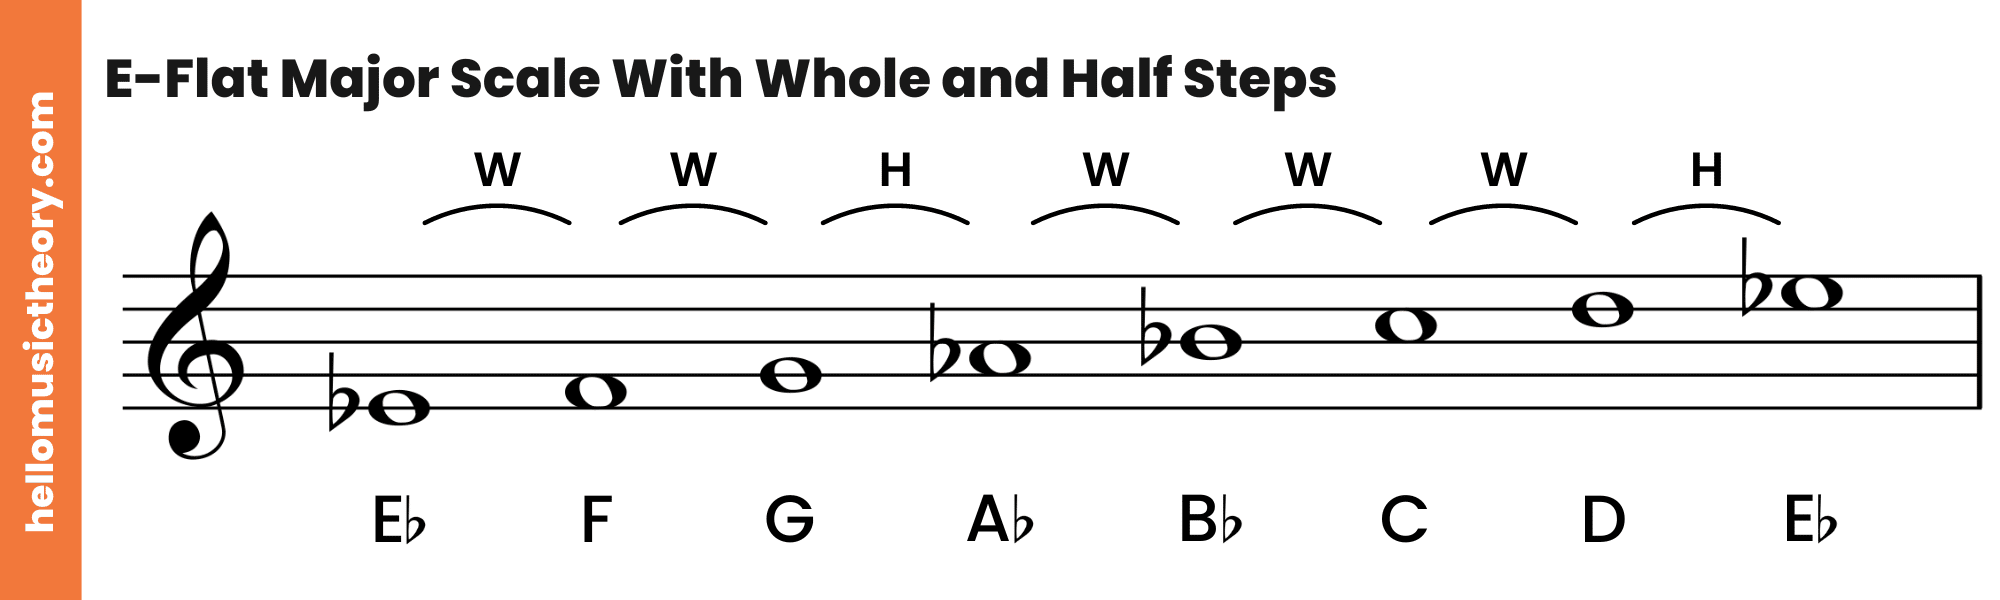 E-Flat Major Scale Treble Clef With Whole and Half Steps